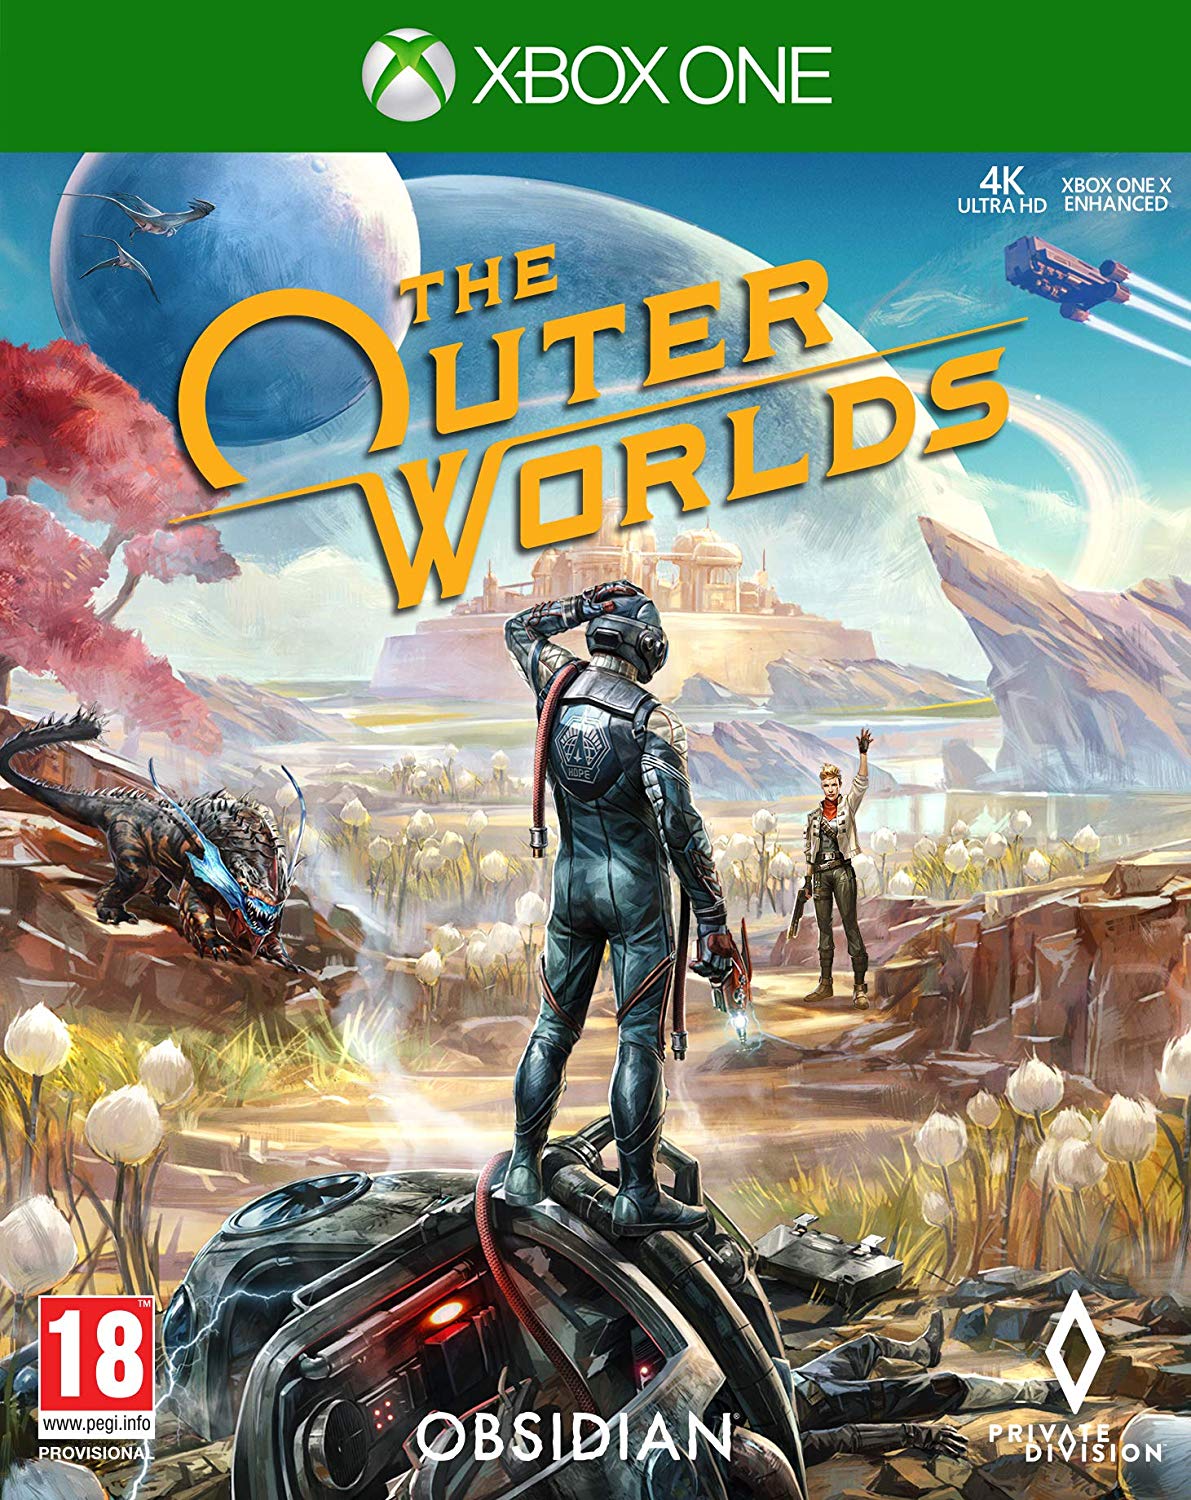 The Outer Worlds Digital Download Key (Xbox One) - 